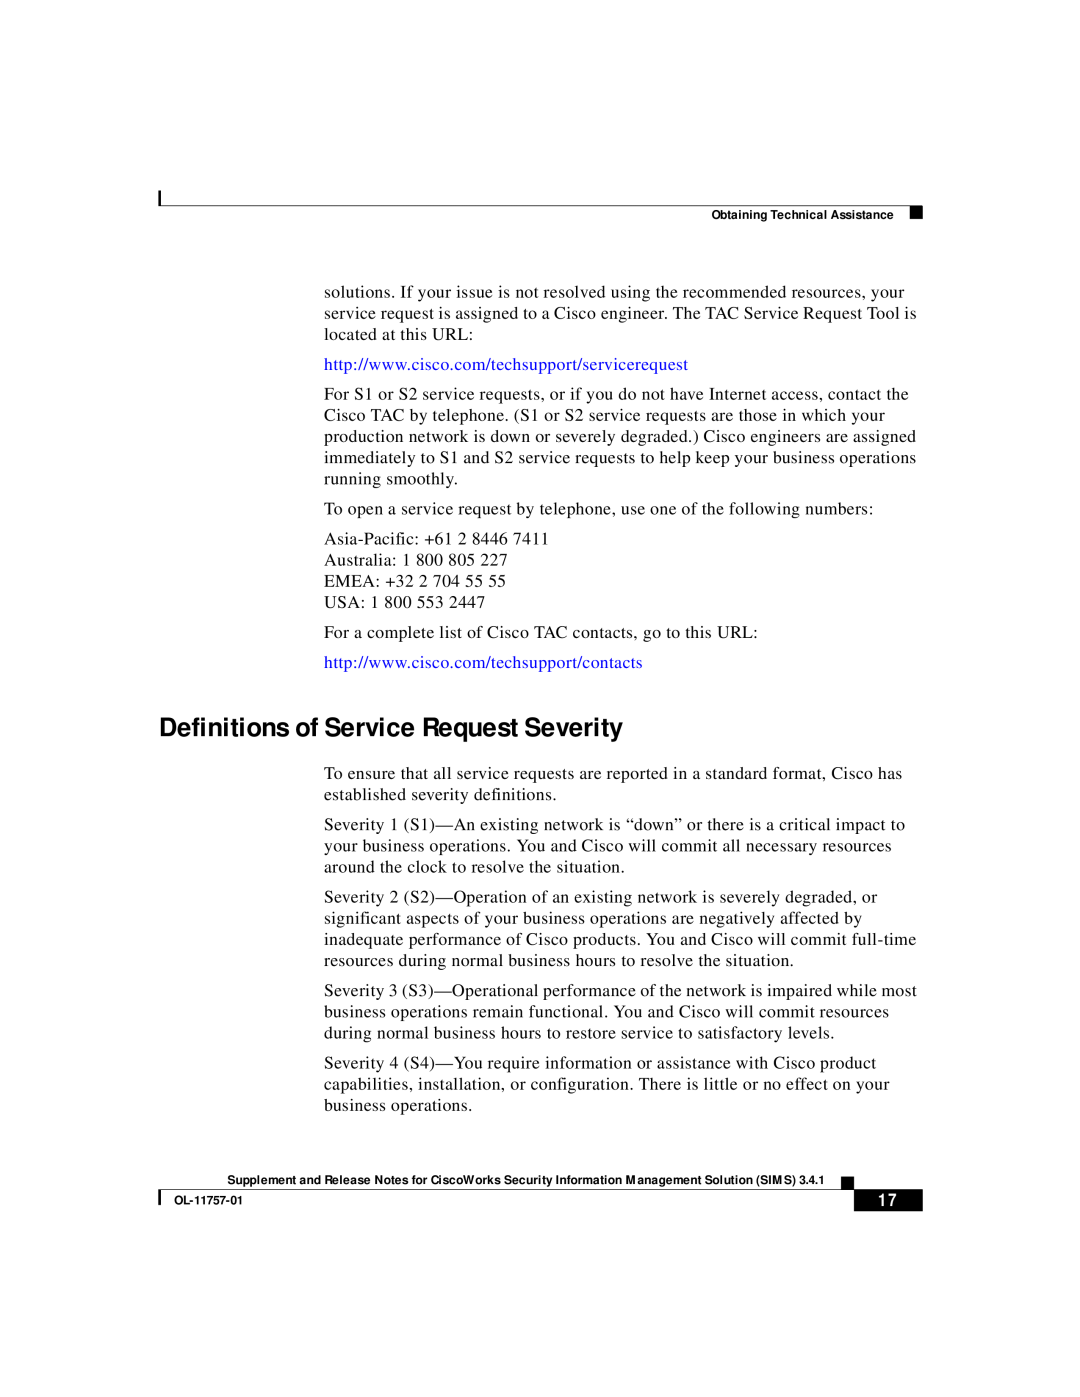 Cisco Systems OL-11757-01 manual Definitions of Service Request Severity 